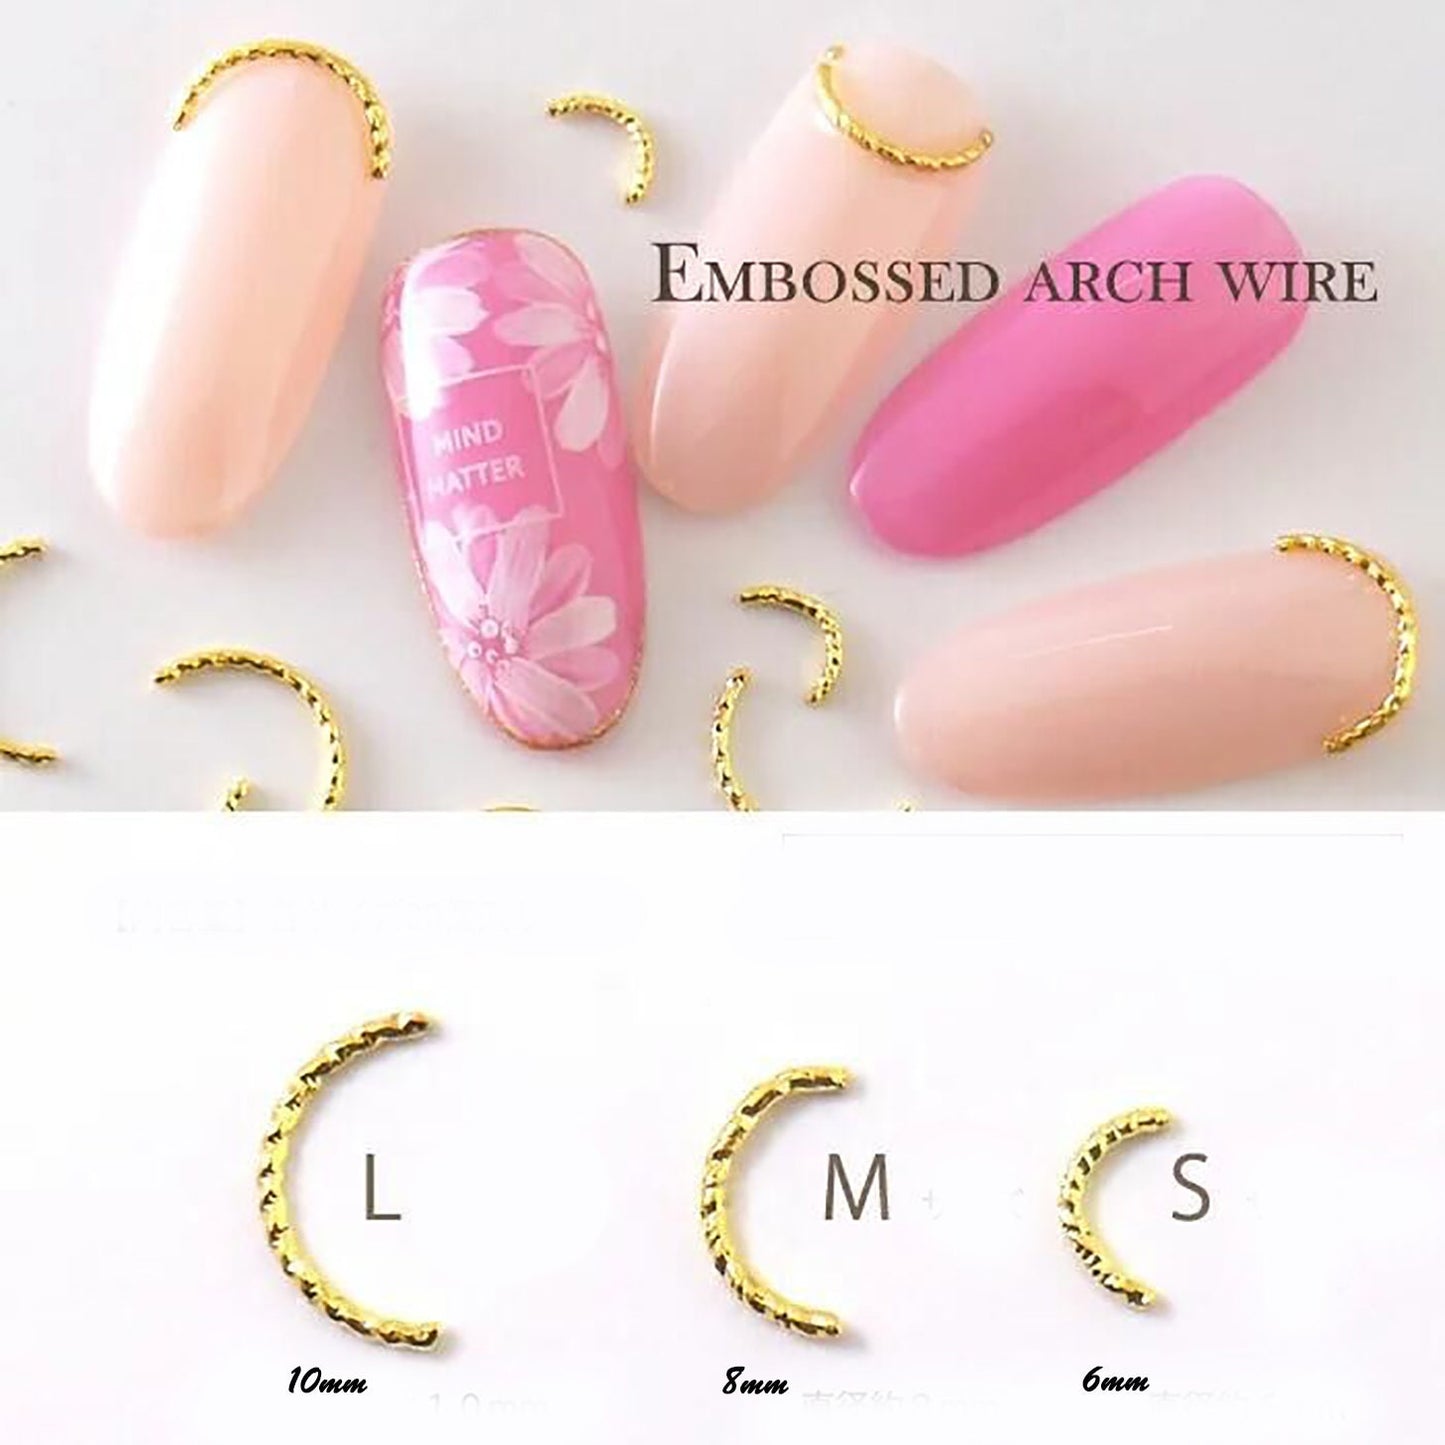 Embossed arch wire nail studs/Lunula gold arc shaped nail decoration